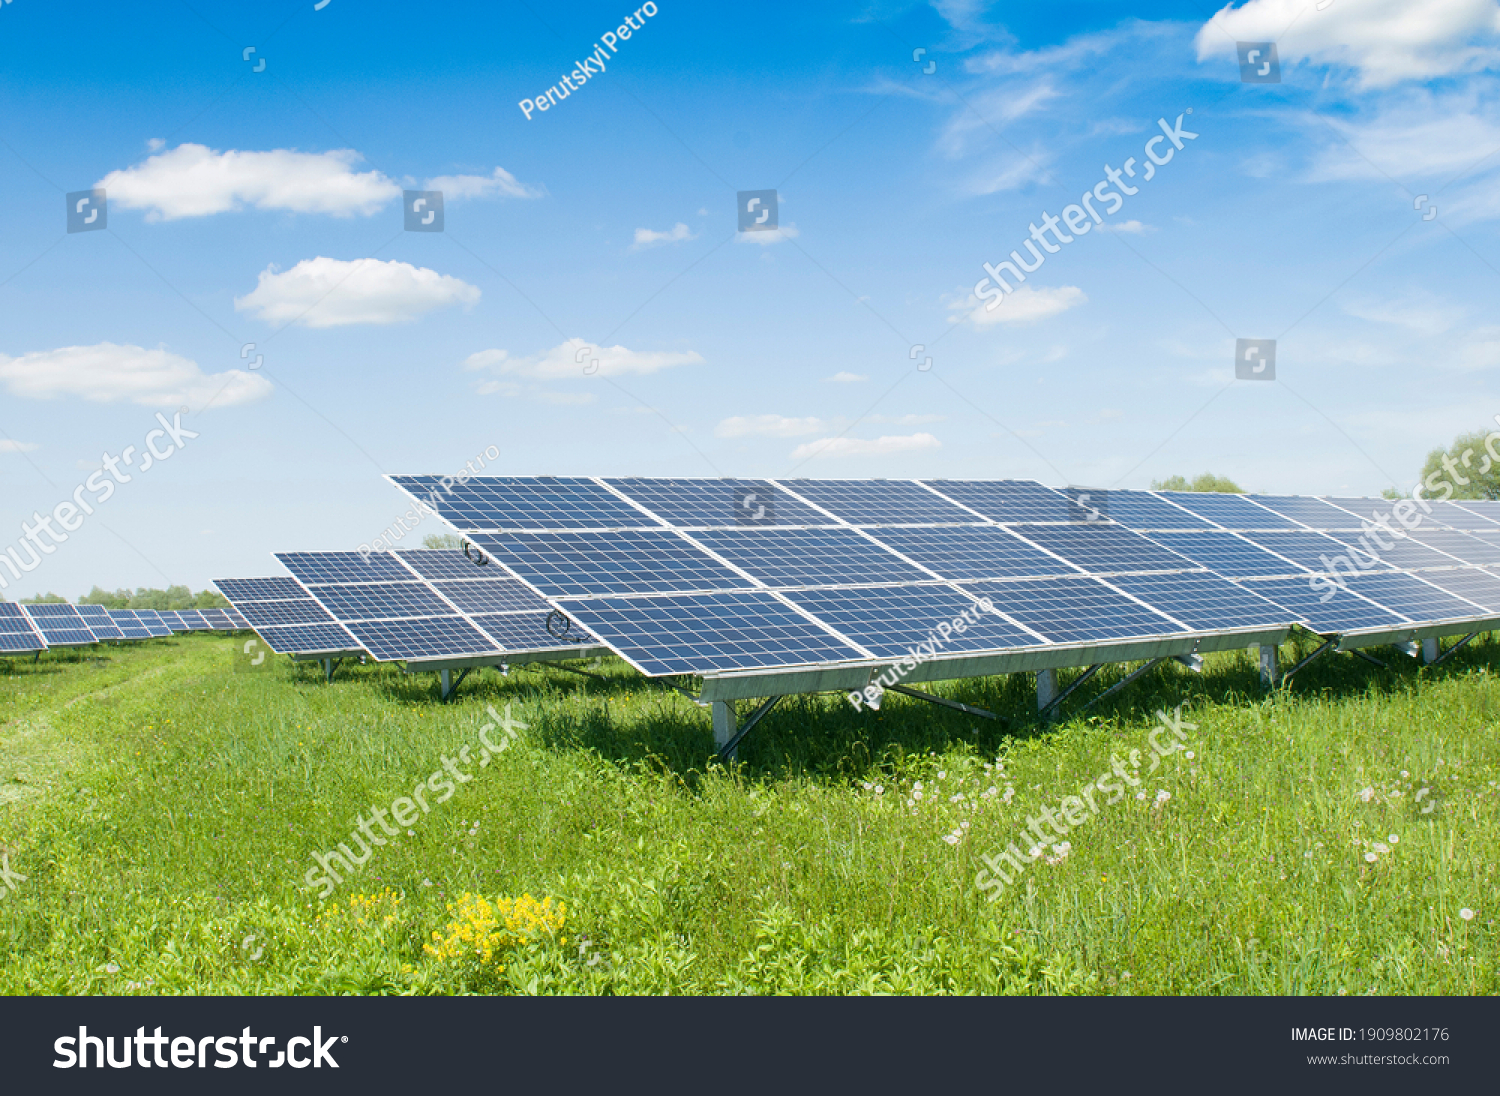 Solar panels and blue sky. Solar panels system power generators from sun. Clean technology for better future #1909802176